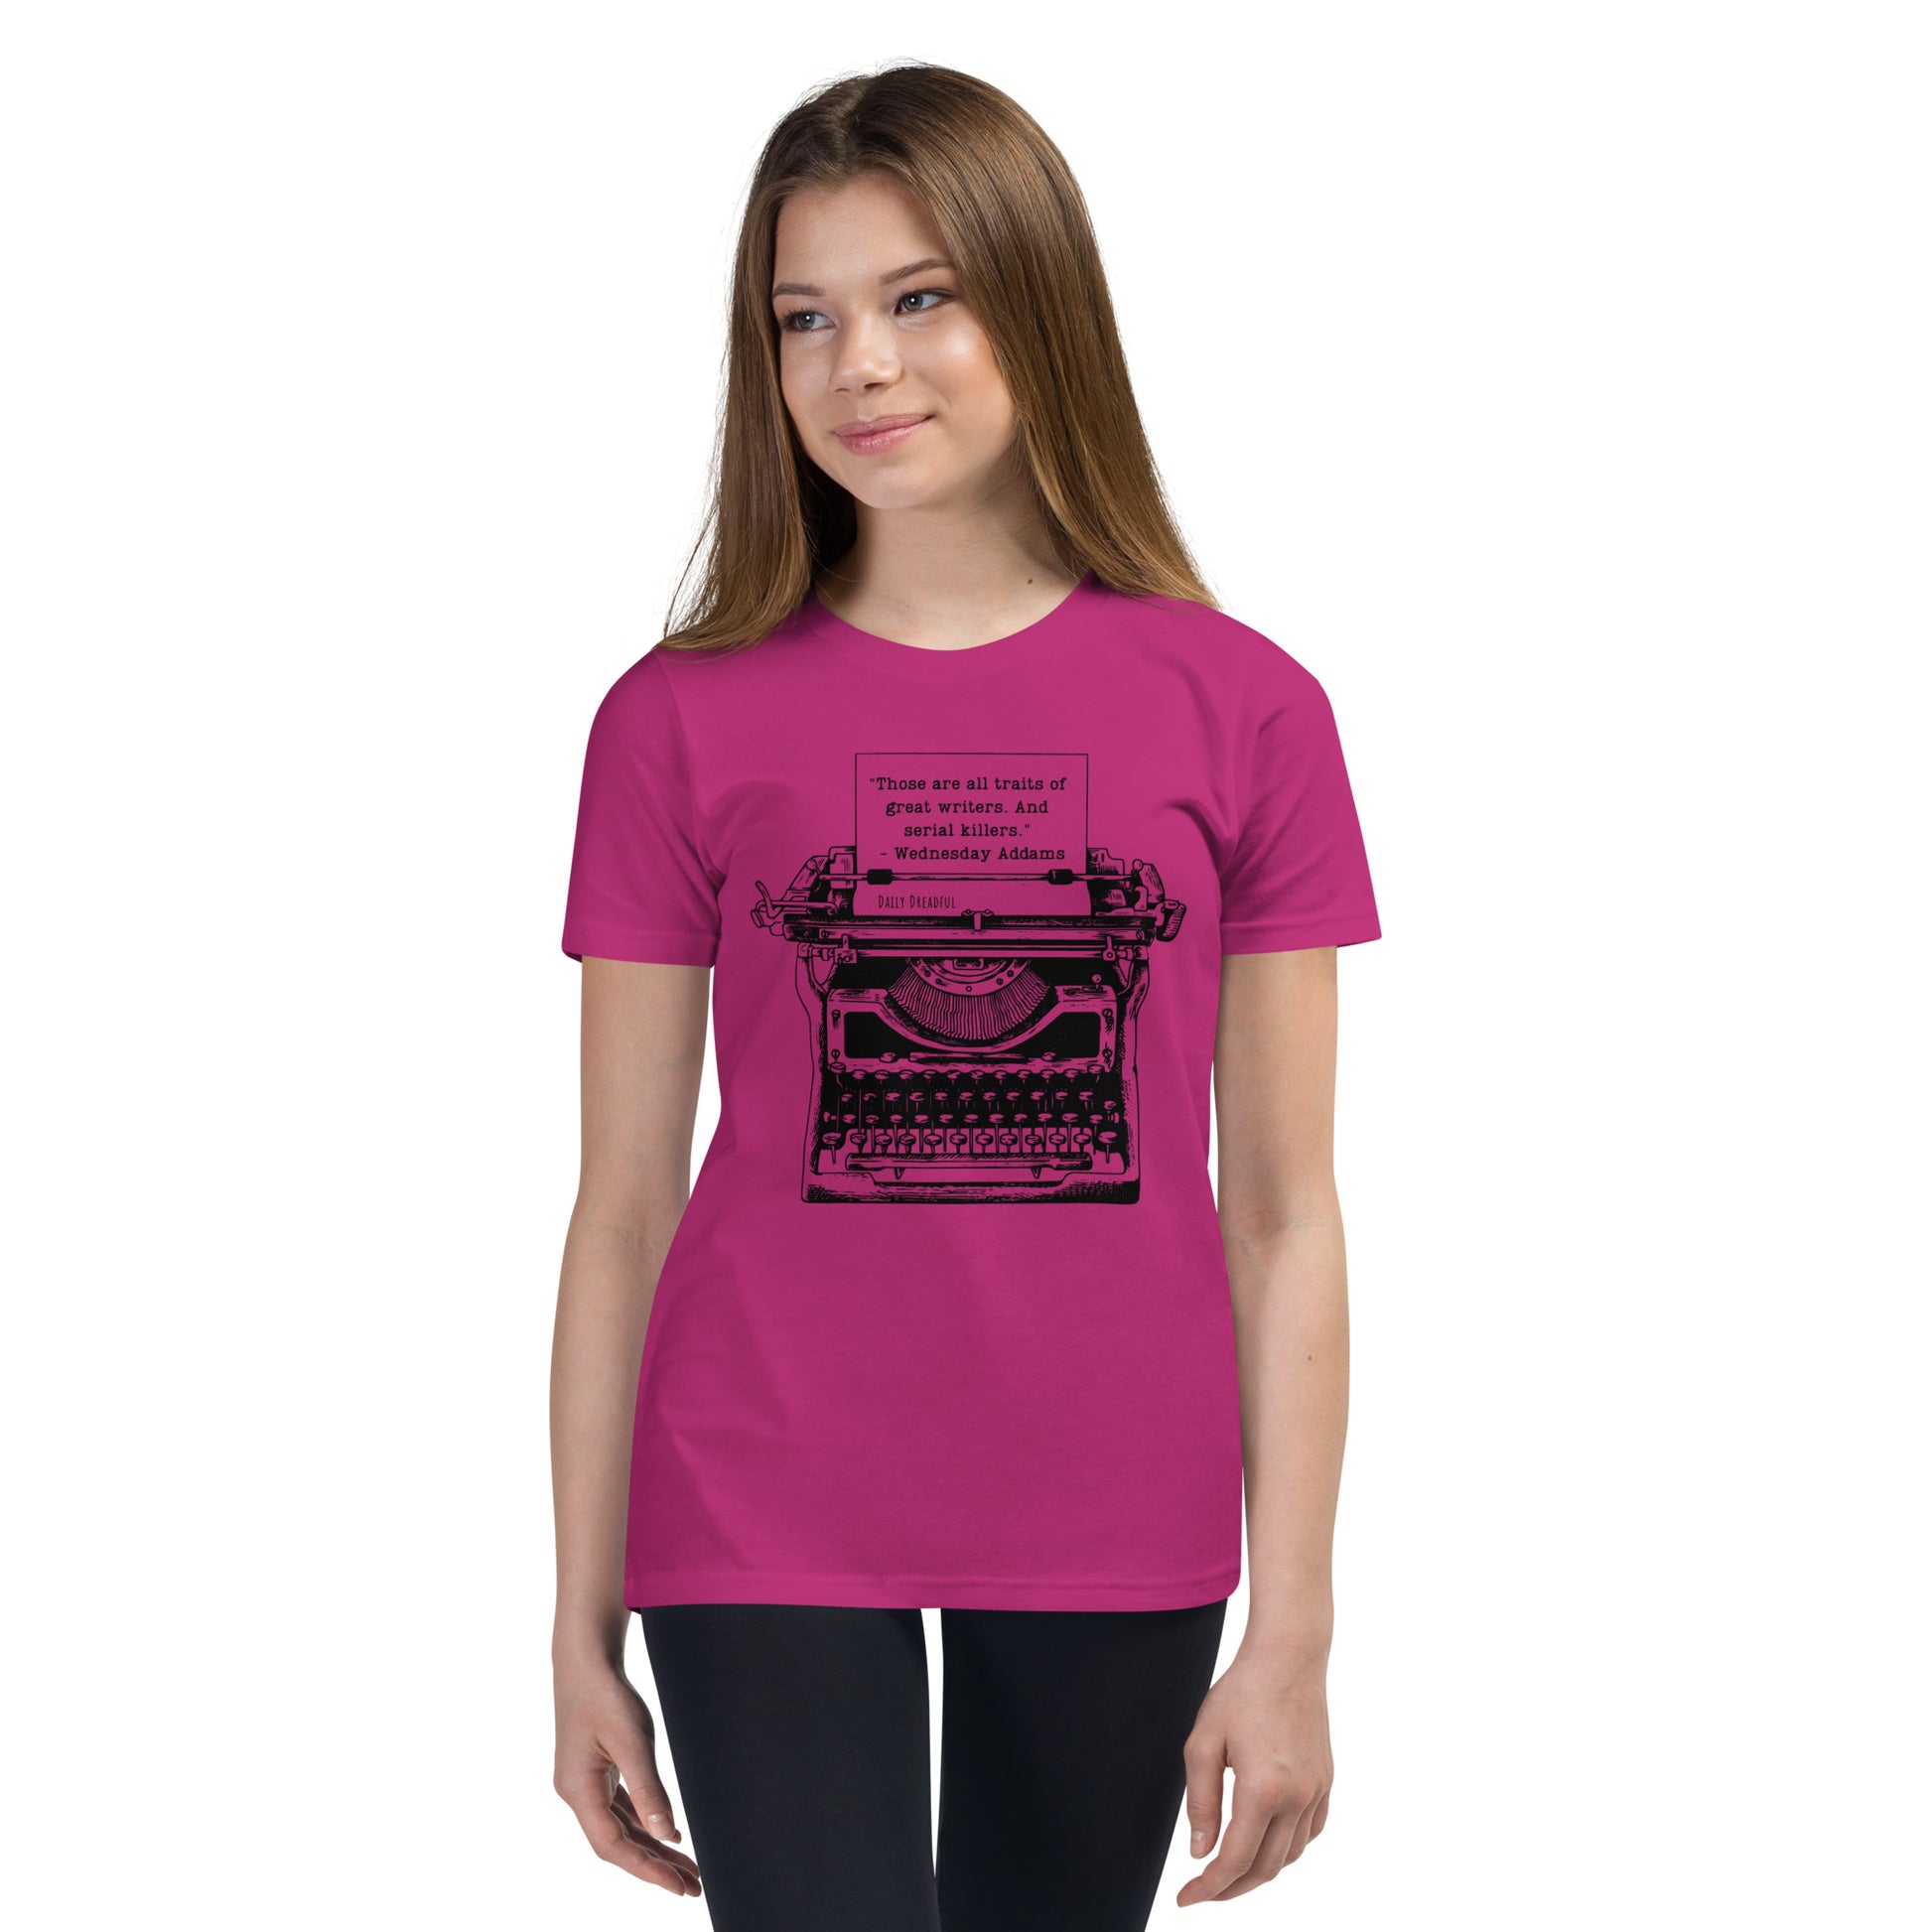 berry "Wednesday Addams Typewriter" Youth Short Sleeve T-Shirt from Daily Dreadful